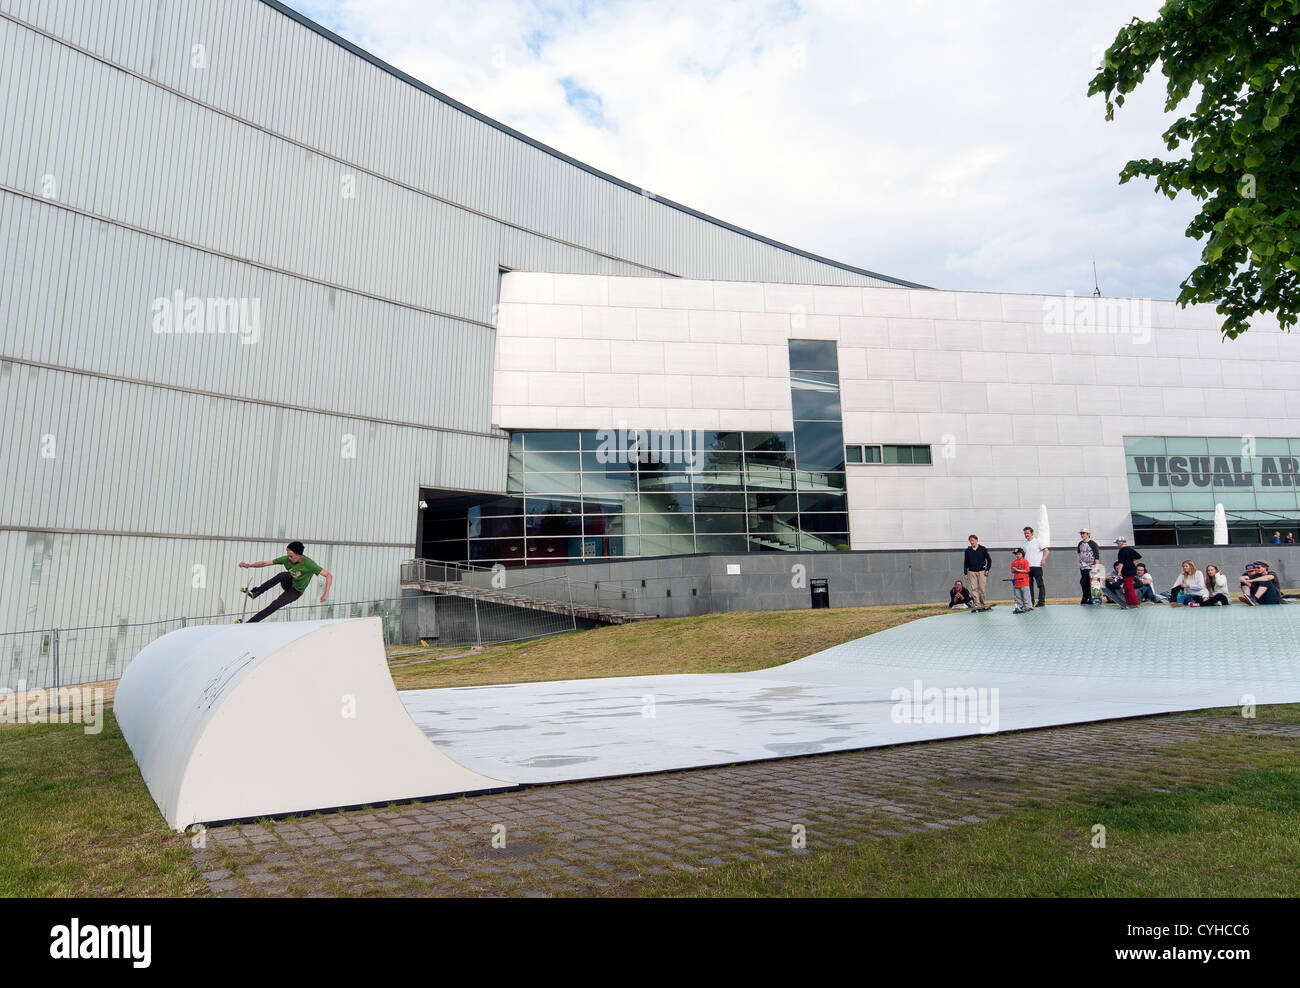 Teenager skateboarding on ramp in front of the Museum of Contemporary Art Kiasma in Helsinki, Finland Stock Photo